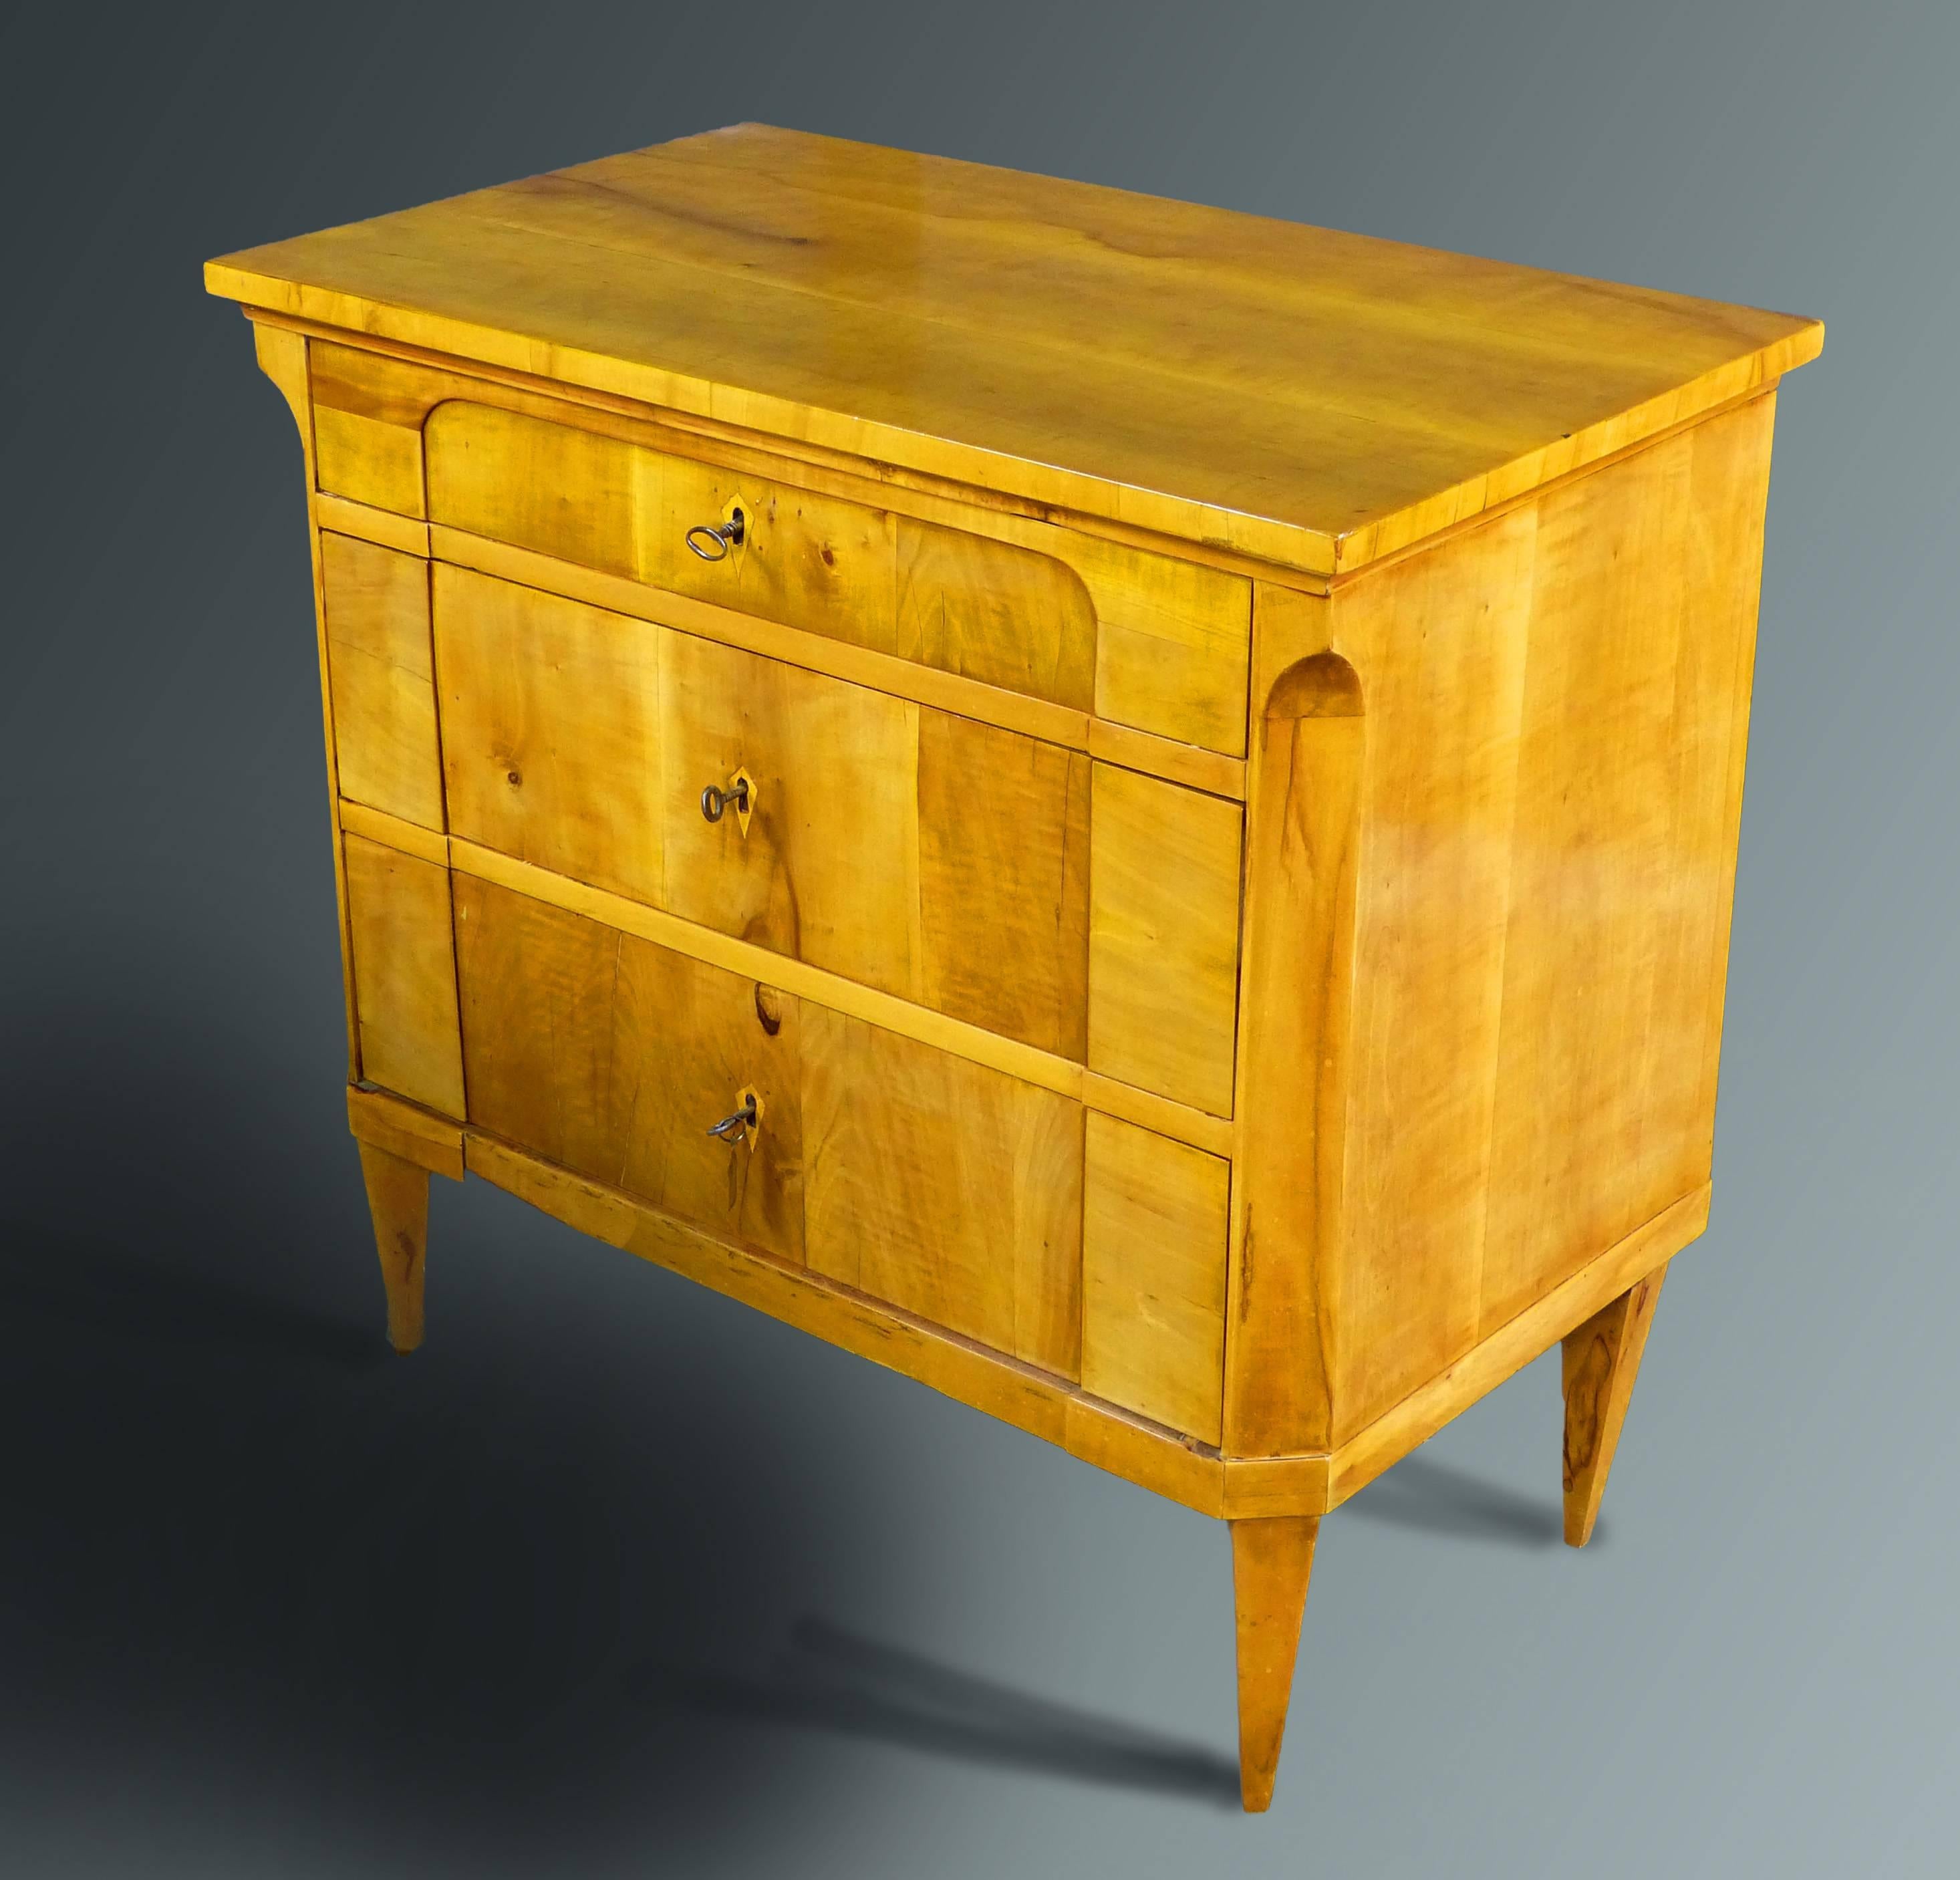 Petit Biedermeier Austrian Commode of satin birch veneers with an architectural front and canted corners, the upper drawer opens to reveal a writing surface, leather lined, with interior storage compartments and a center that can be used as a